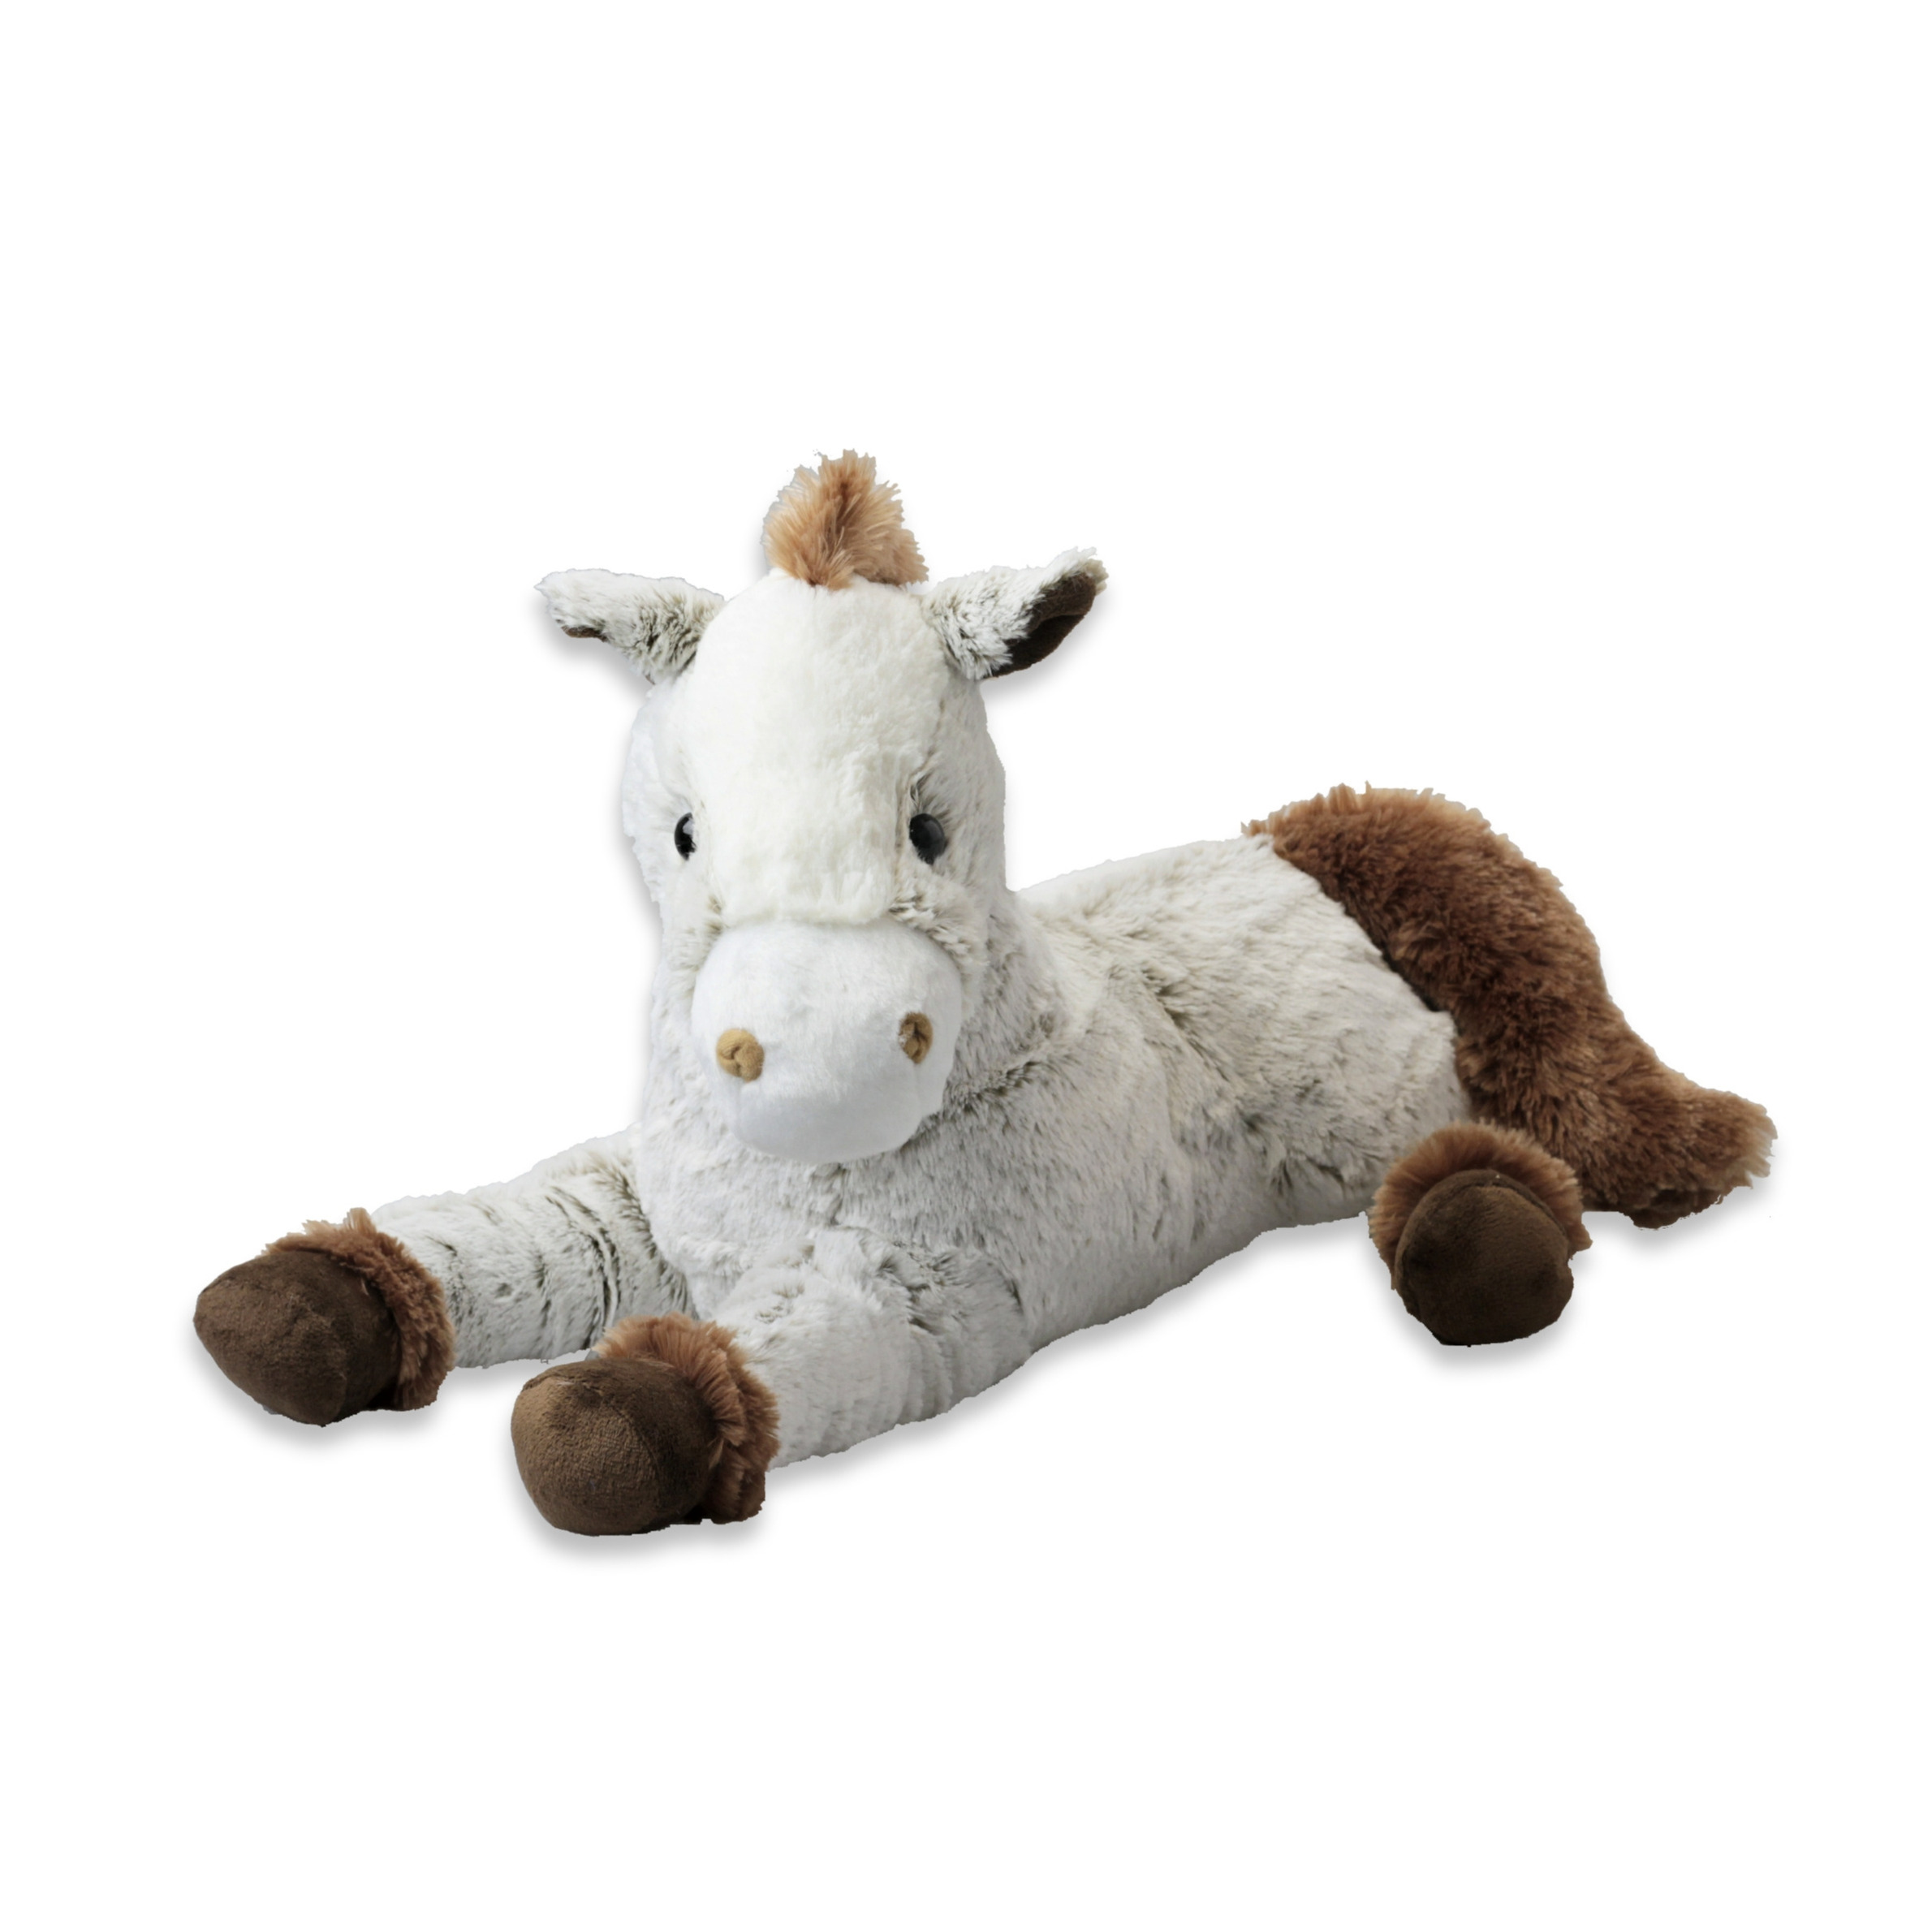 Inware Pluche paard knuffel - liggend - wit/bruin - polyester - 45 cm -